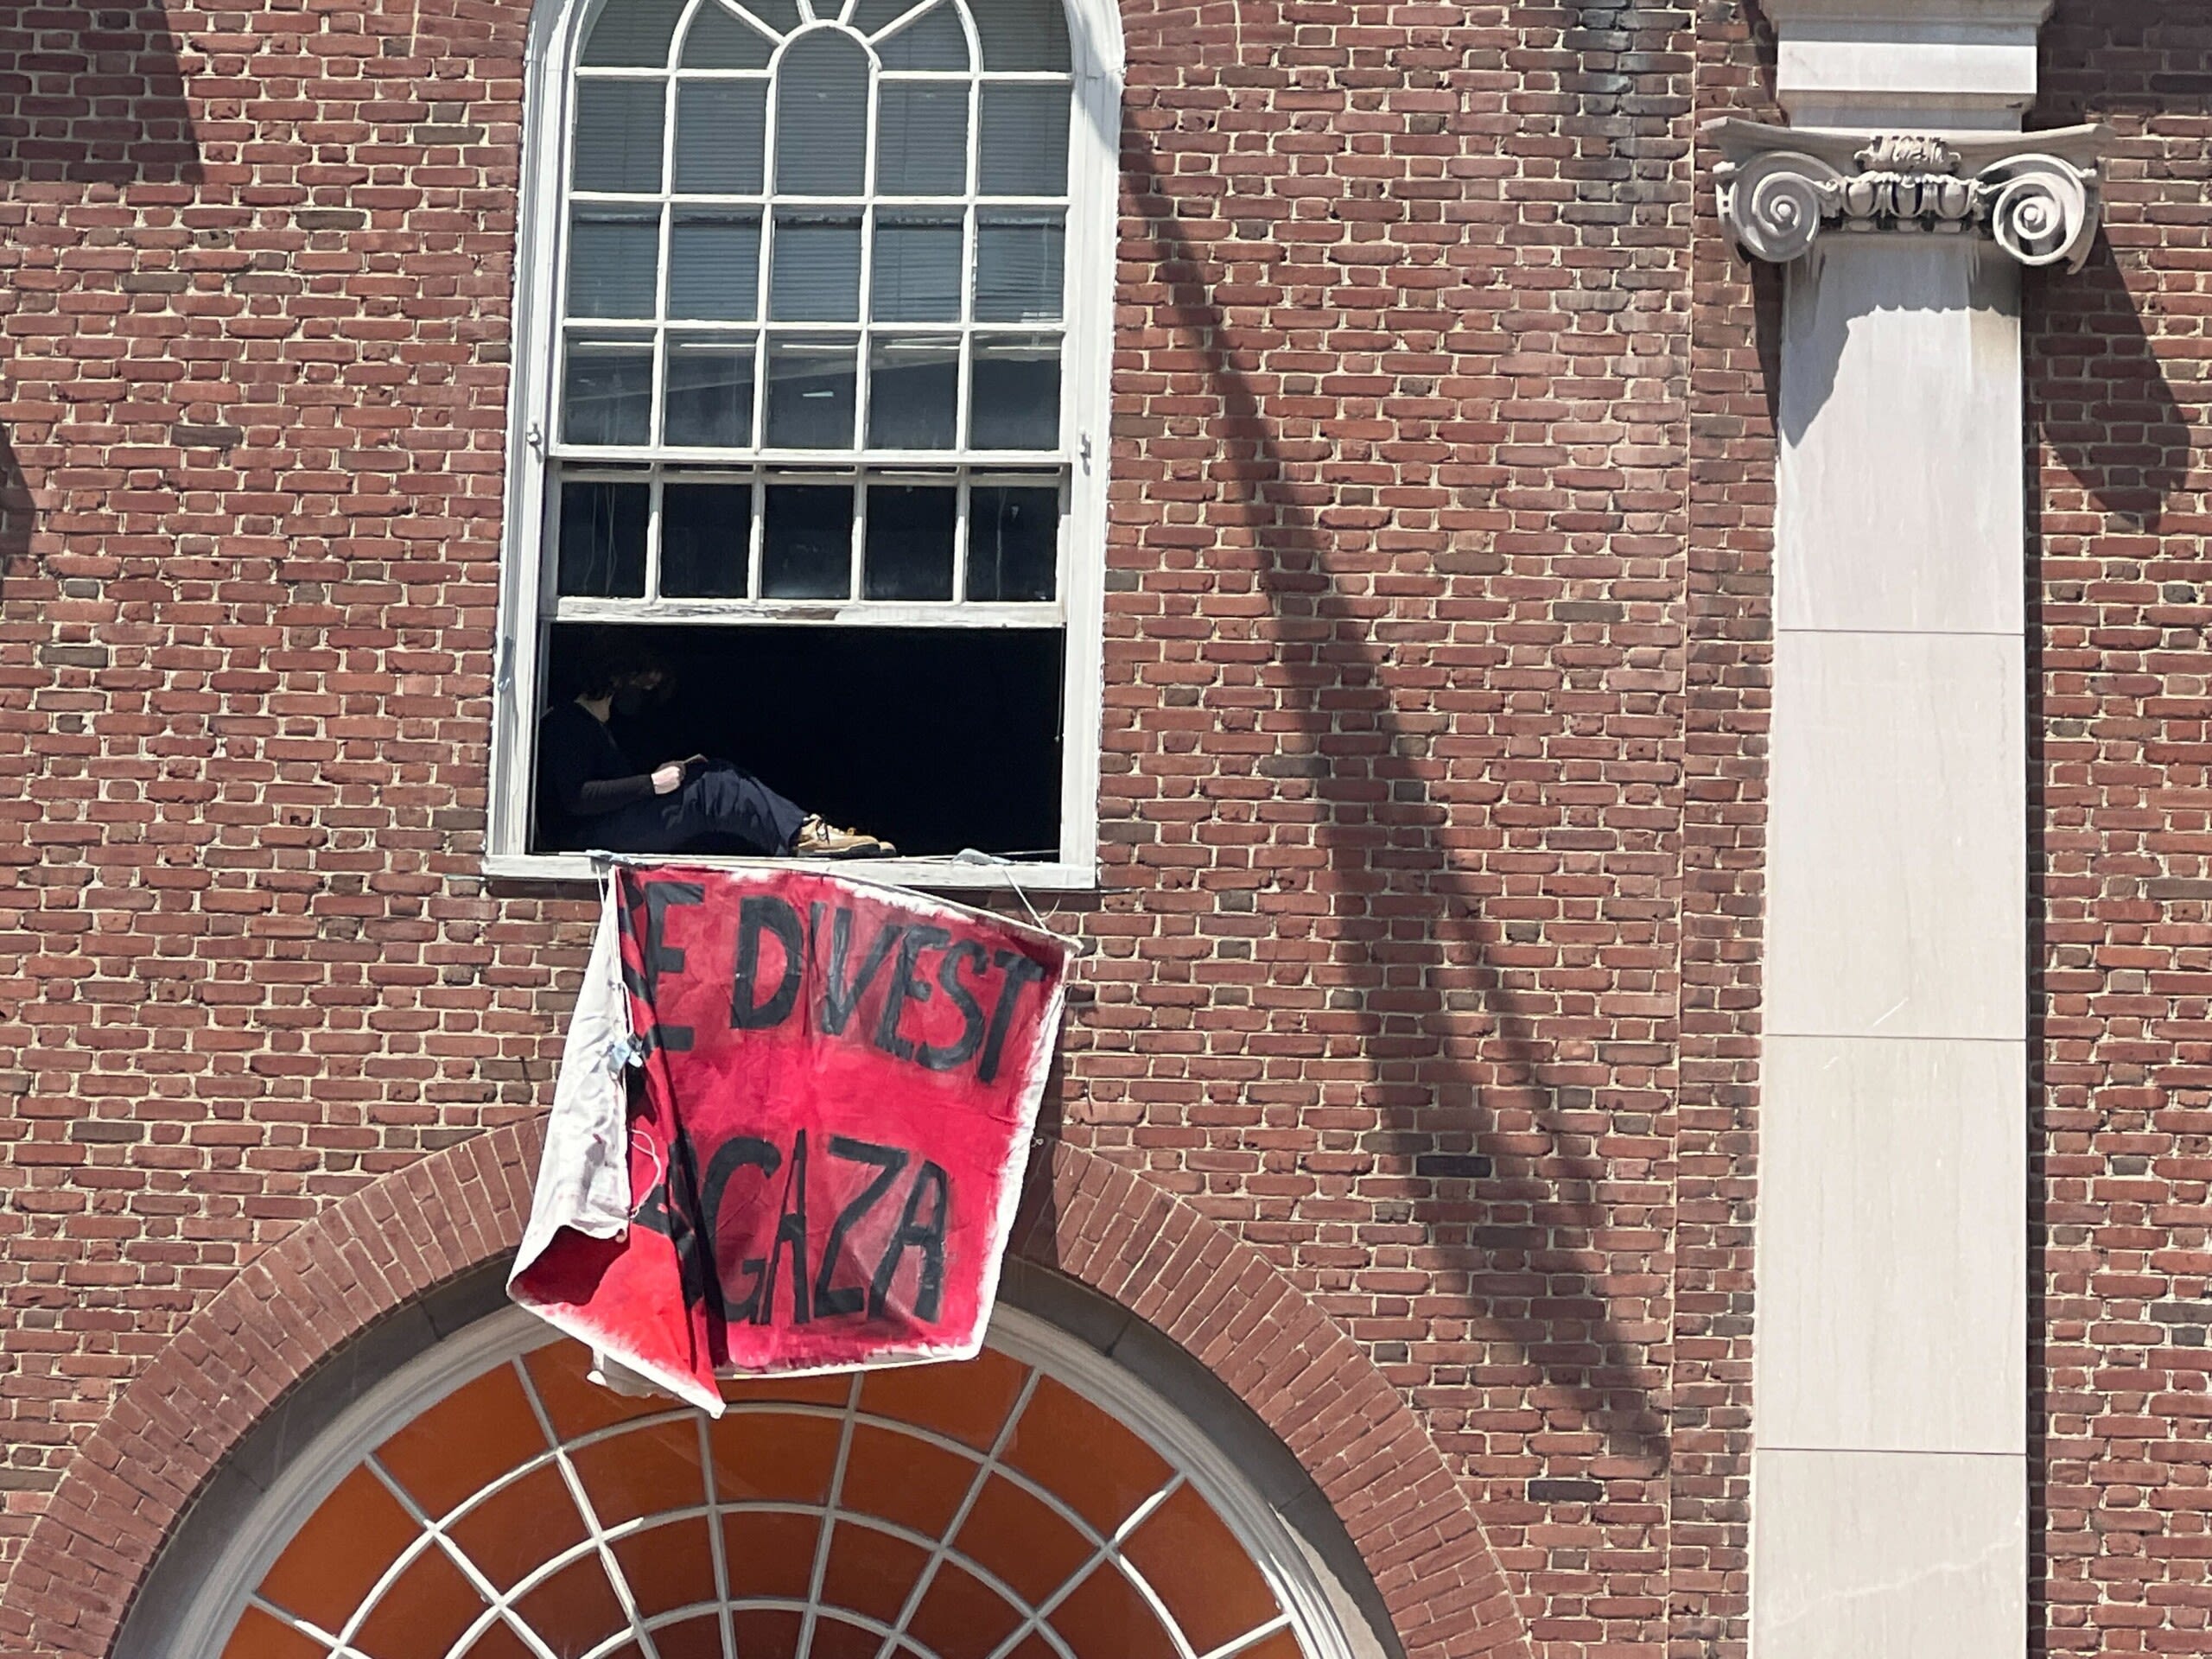 RISD students end occupation of administration building | ABC6